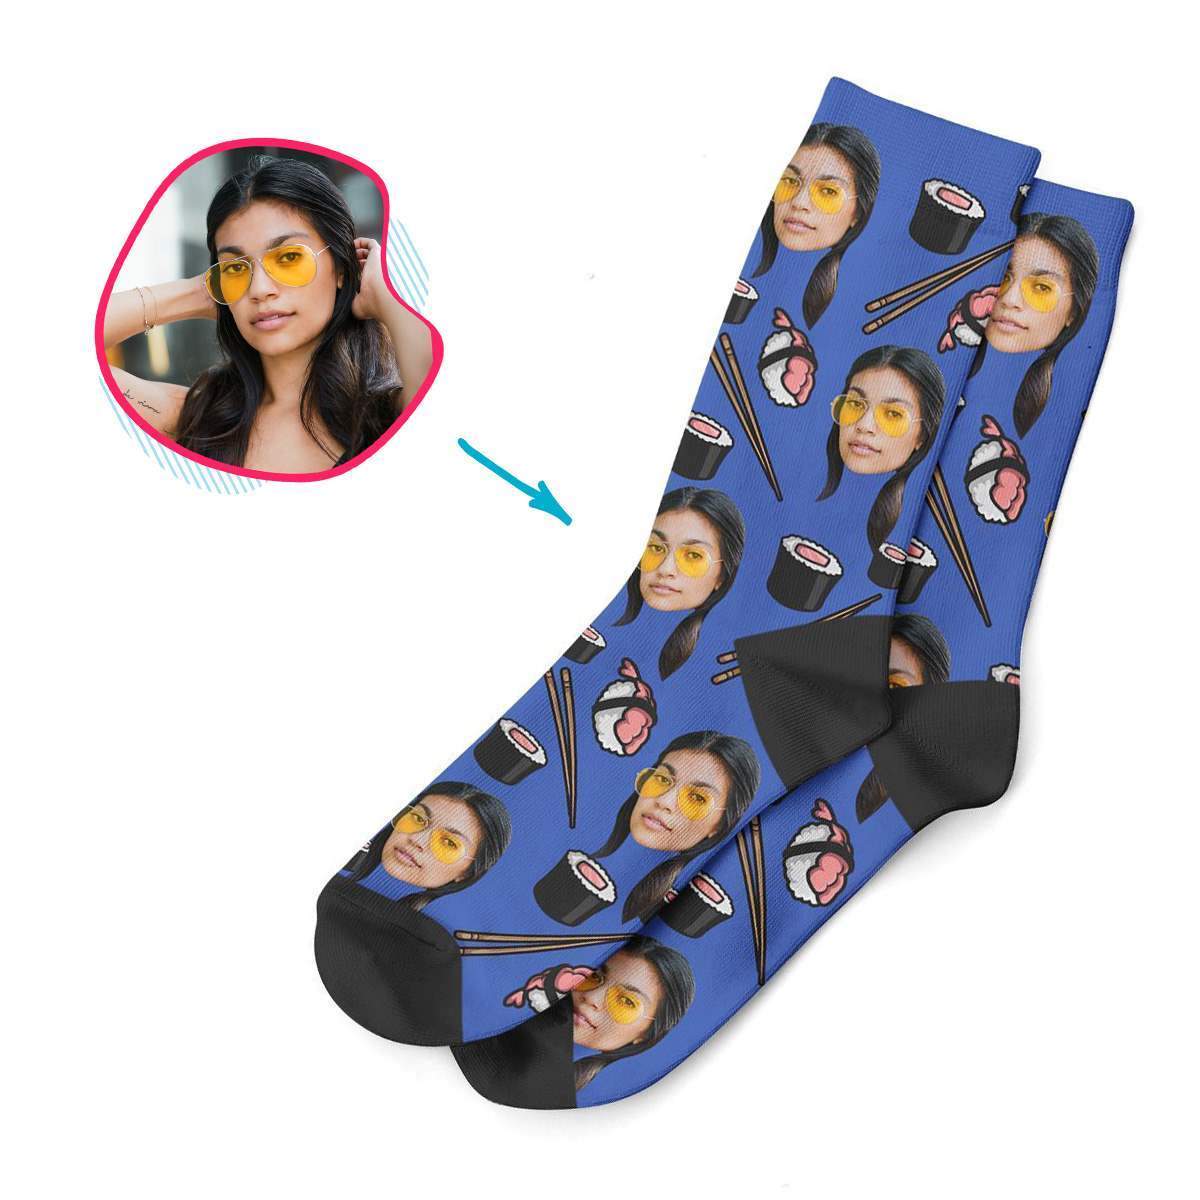 darkblue Sushi socks personalized with photo of face printed on them